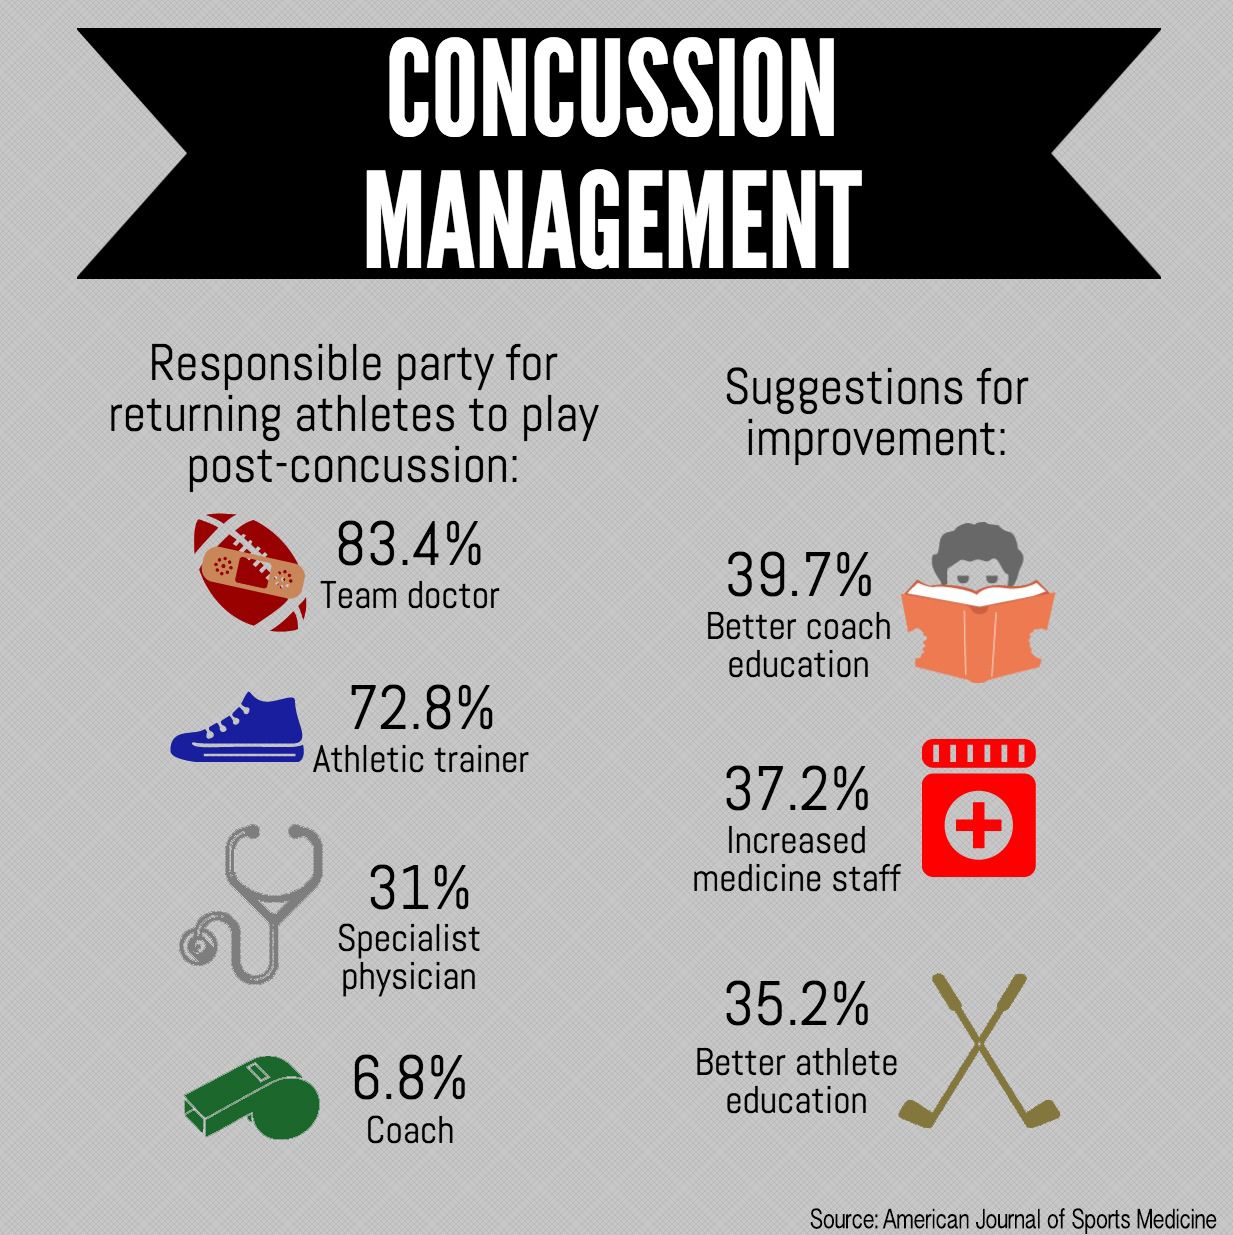 Study evaluates NCAA concussion policy compliance